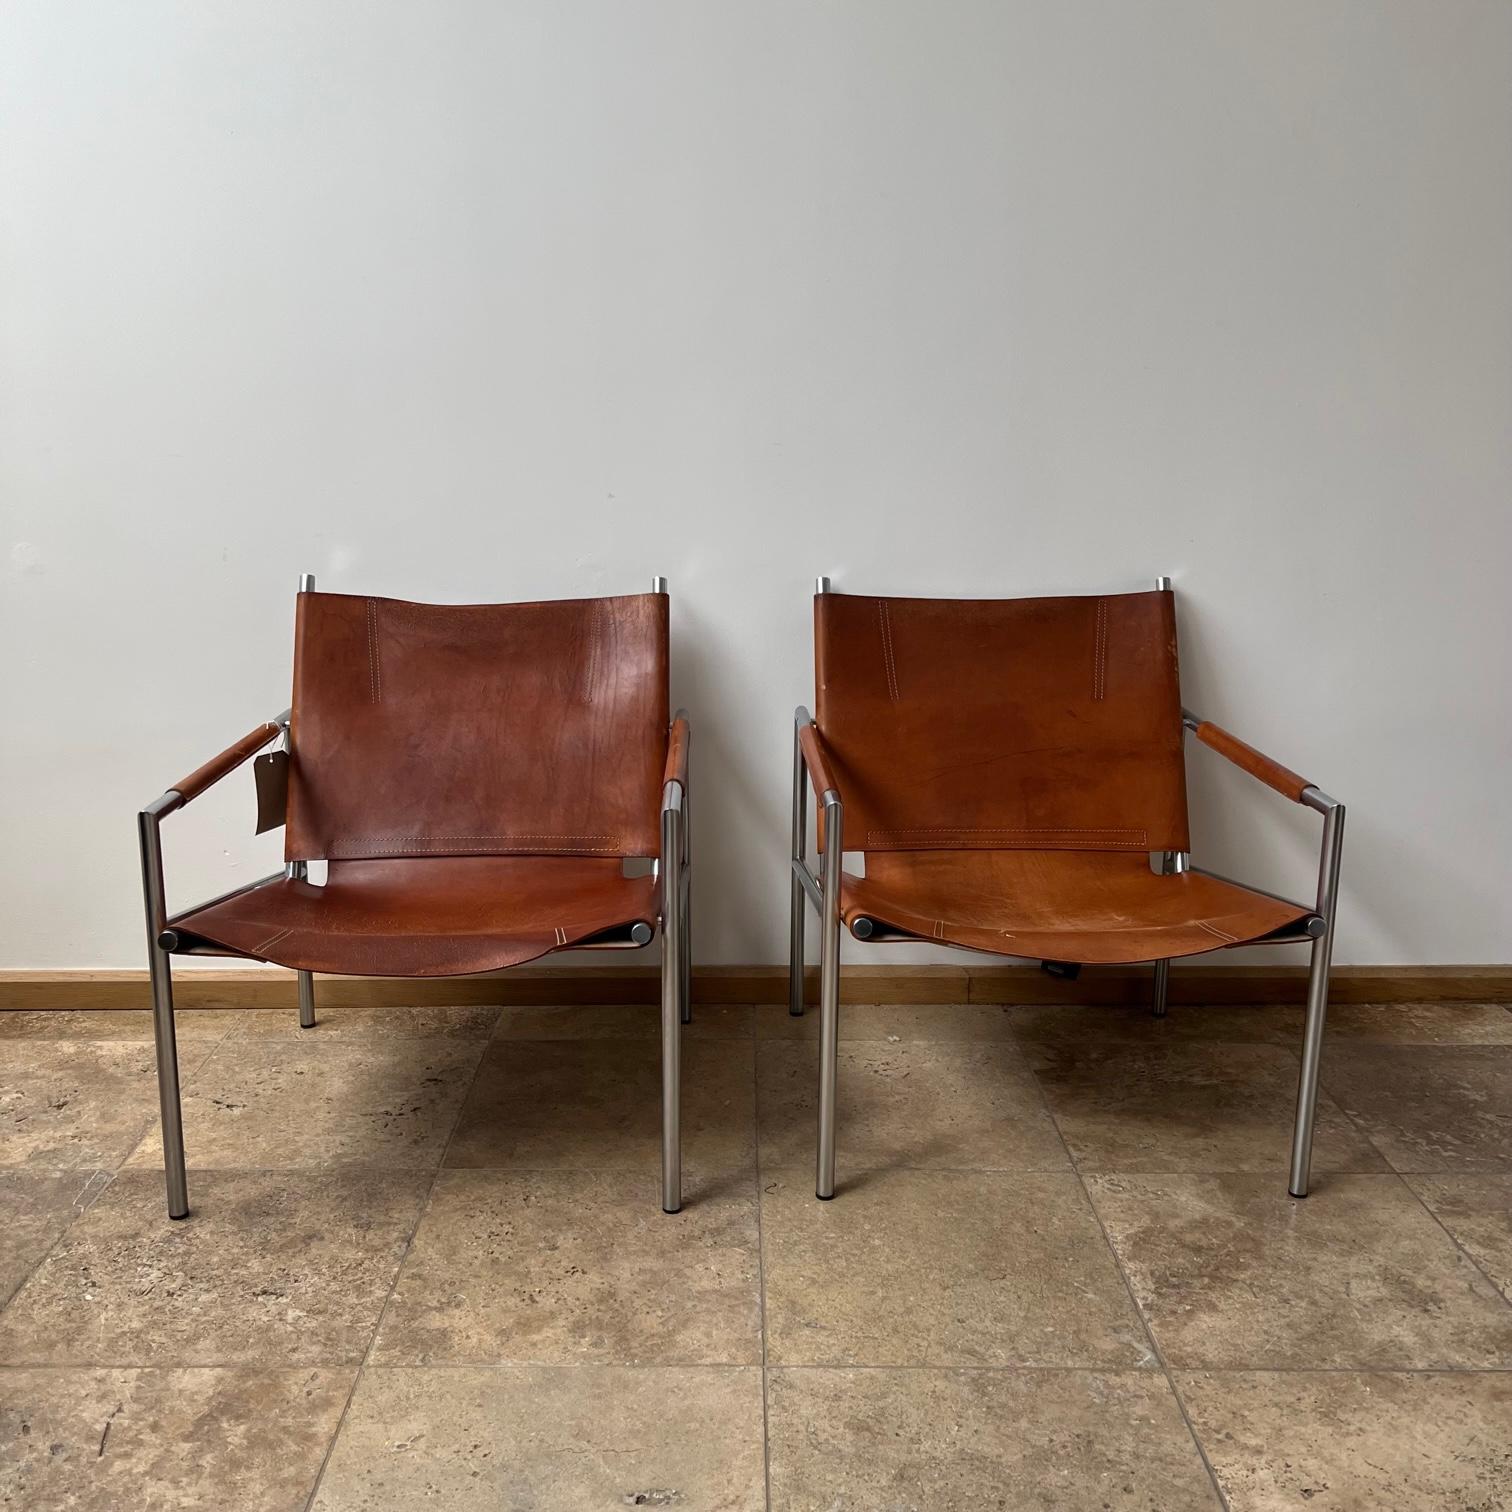 A pair of mid-20th leather and metal armchairs by Martin Visser. 

Holland, c1960s. 

Early model, with lower deeper stance. 

The leather remains in good condition, there is some signs of wear and age commensurate with age. 

PRICE IS FOR